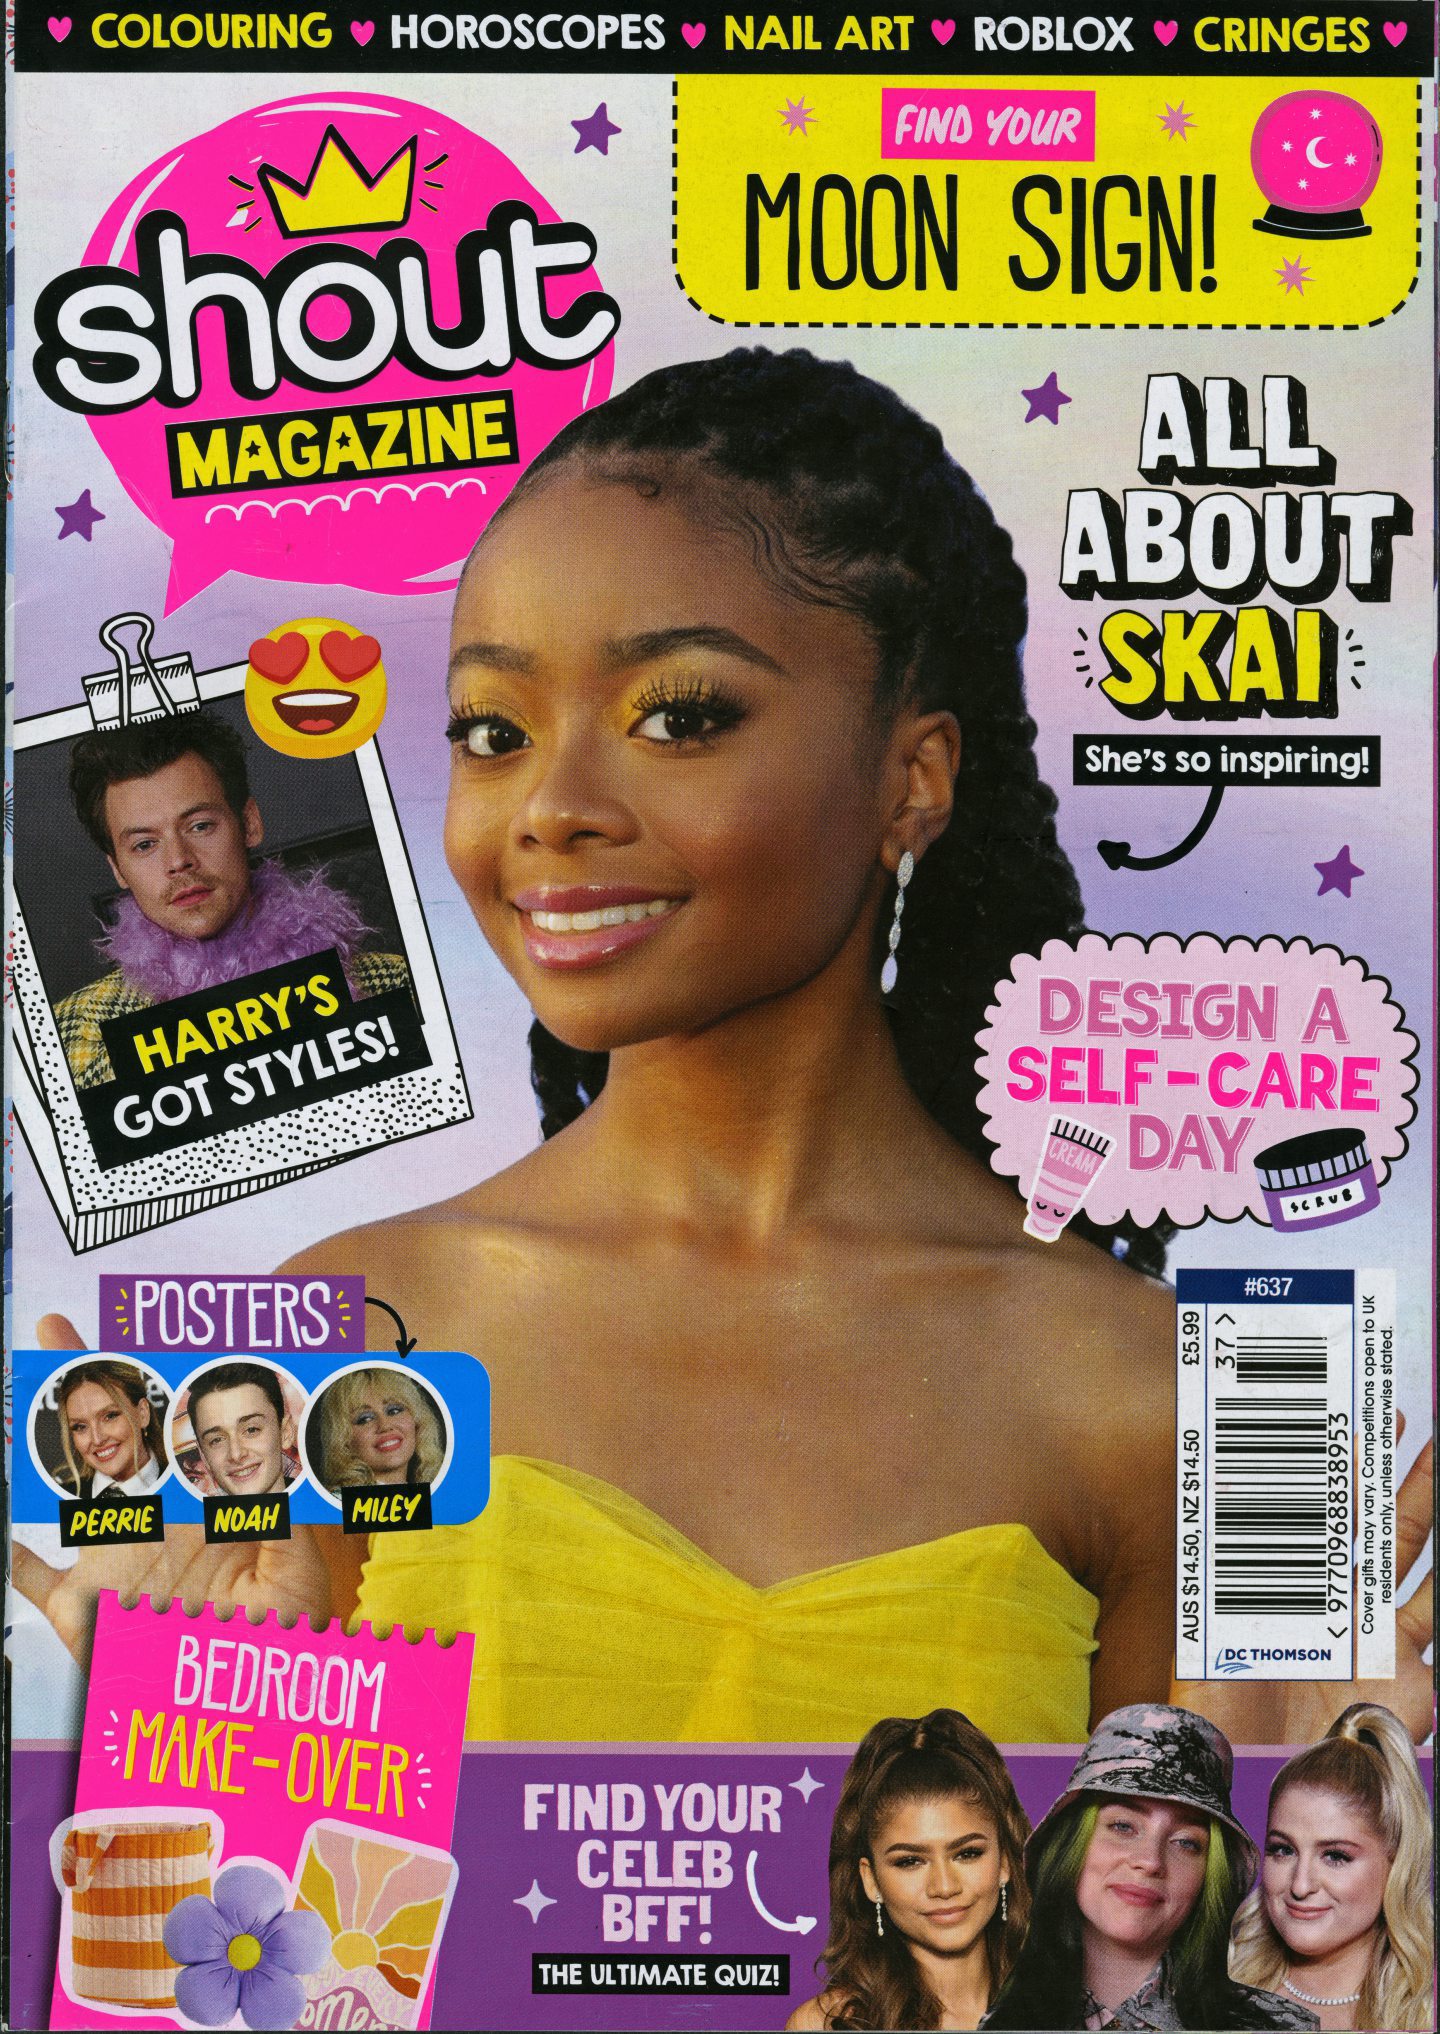 The final issue of Shout was the end of an era. 